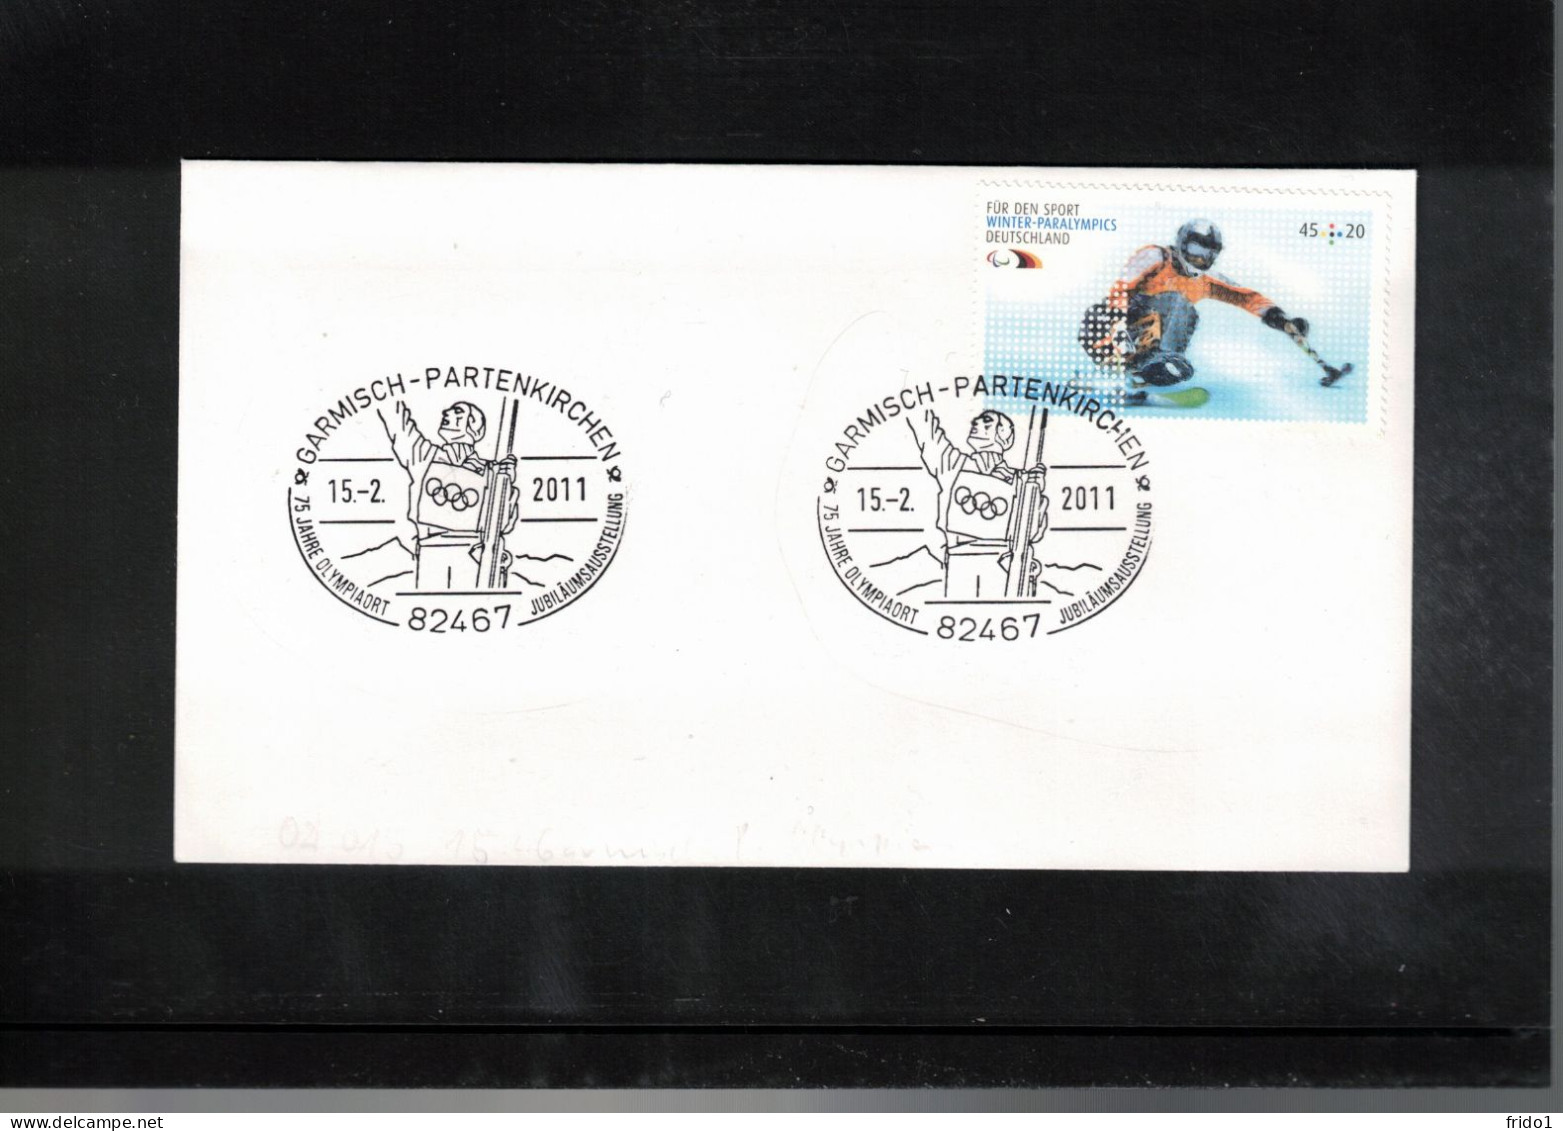 Germany 2011 75th Anniversary Of The Olympic Games In Garmisch-Partenkirchen Interesting Cover - Winter 1936: Garmisch-Partenkirchen